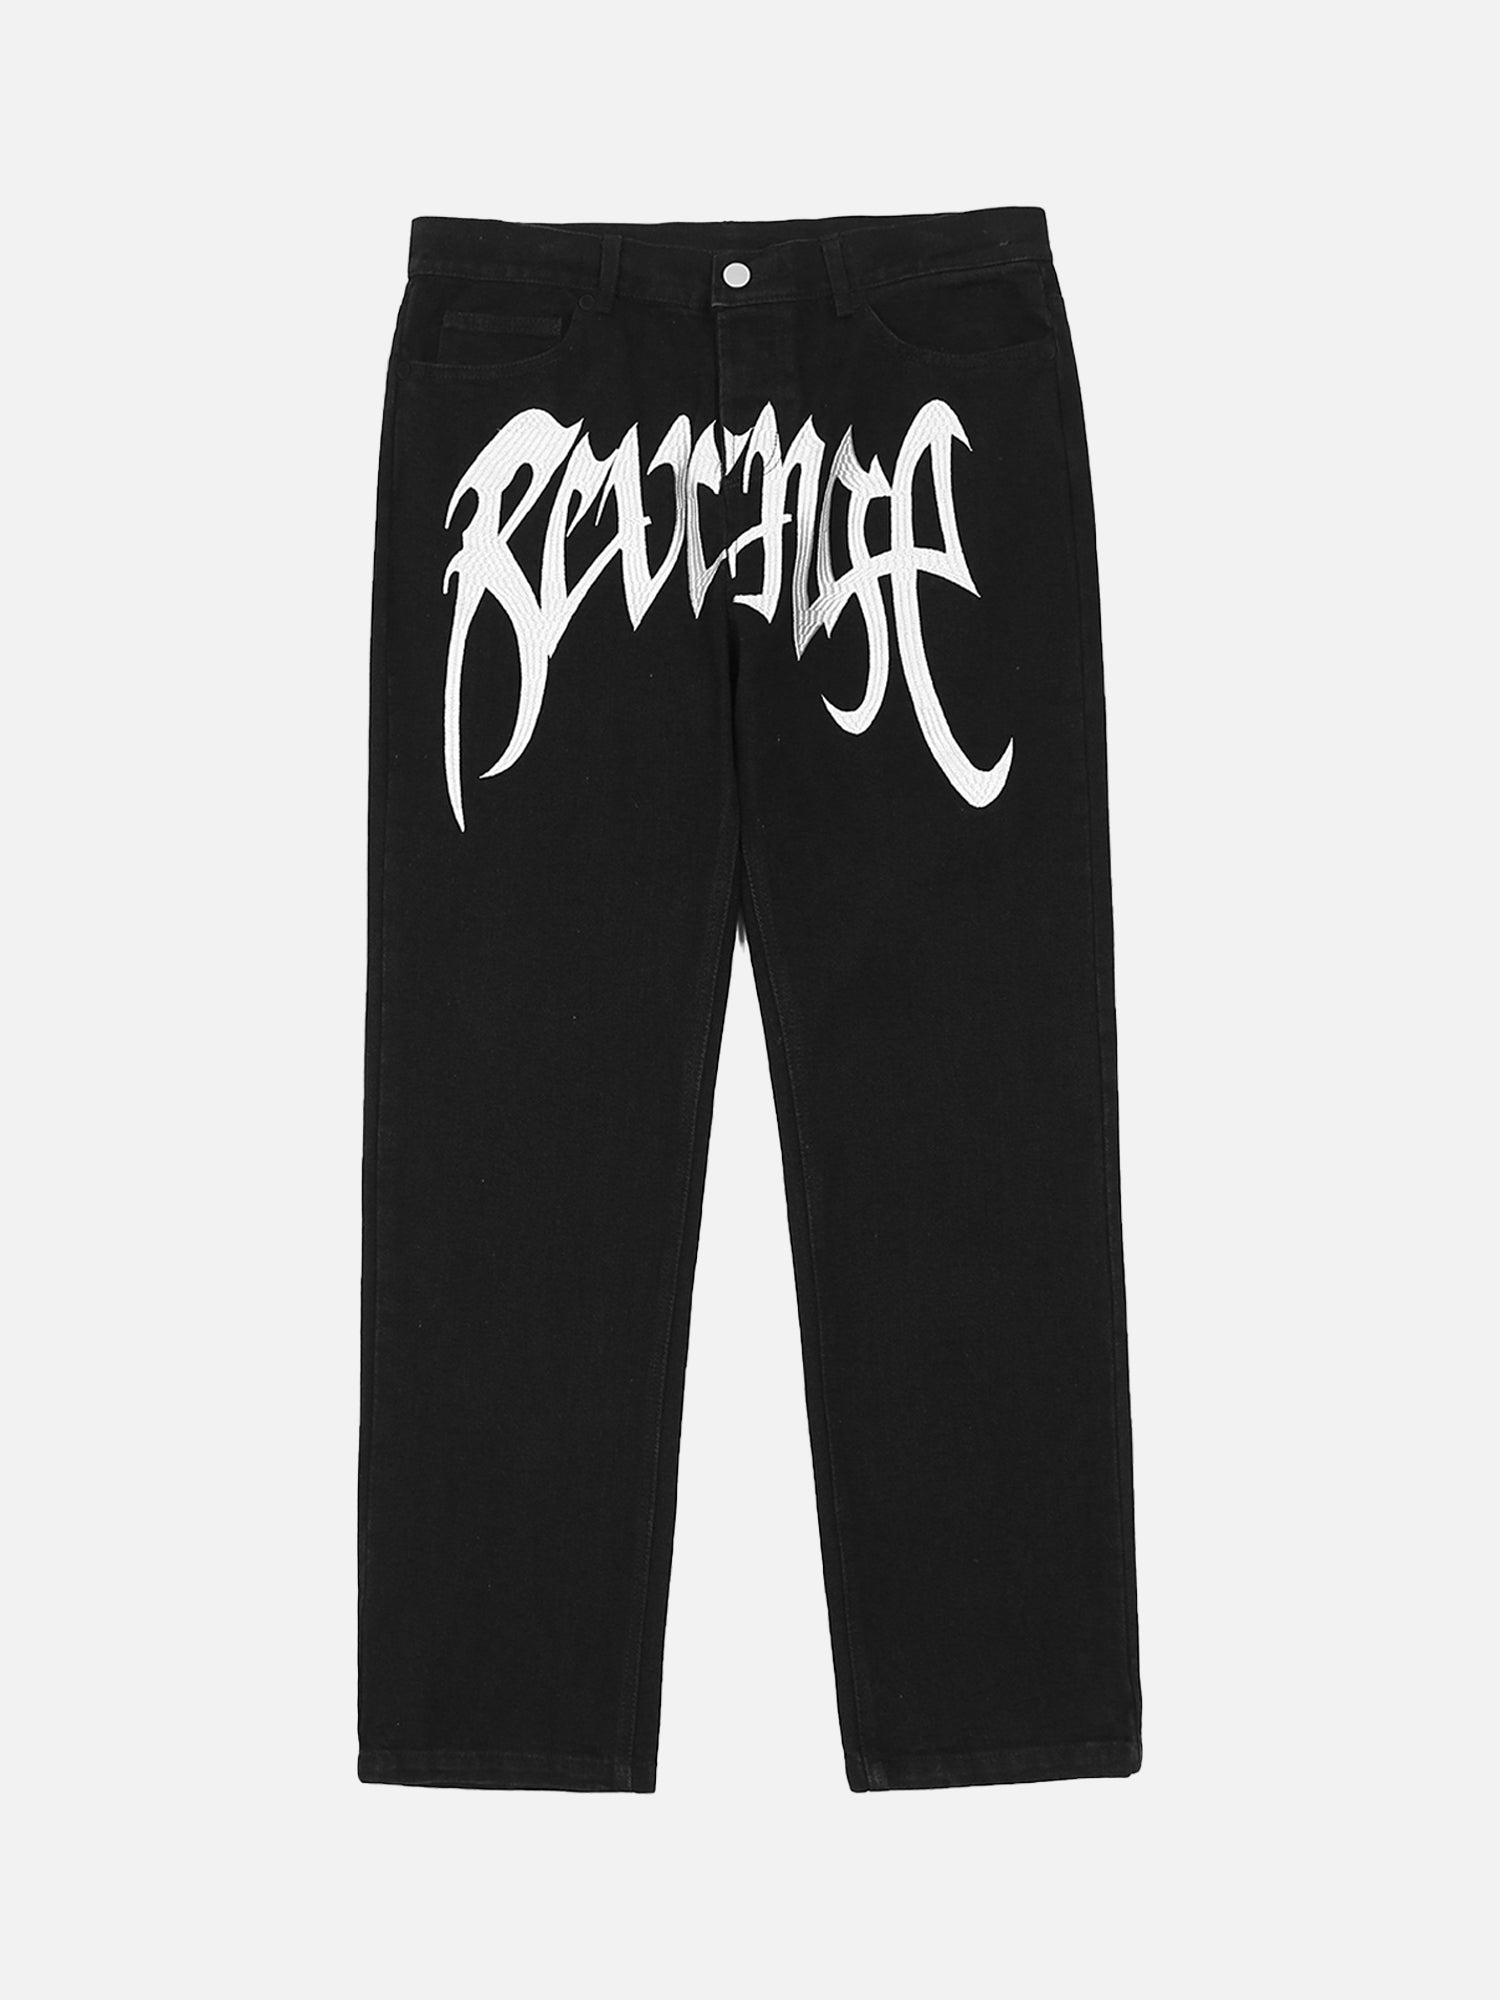 Thesupermade High Street Hip Hop Letter Embroidered Jeans